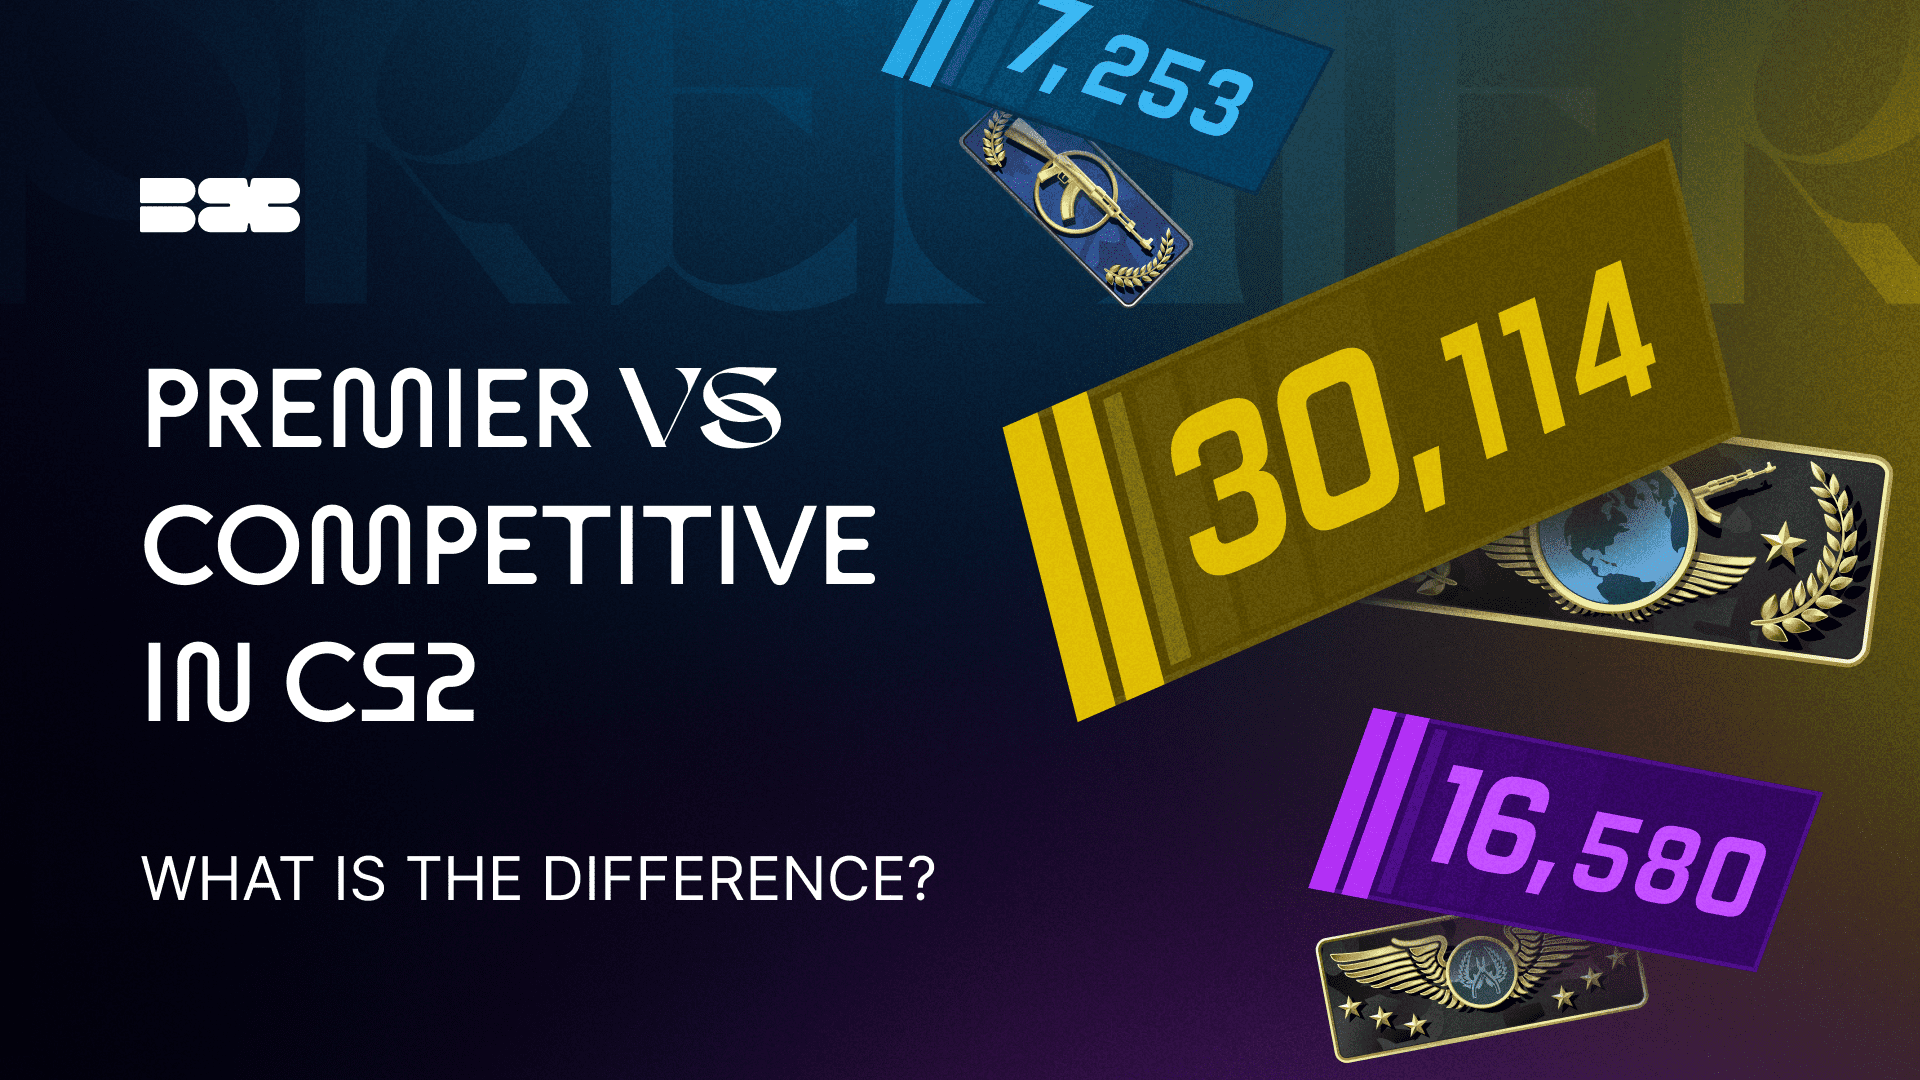 Difference Between Premier and Competitive in CS2 Explained - The